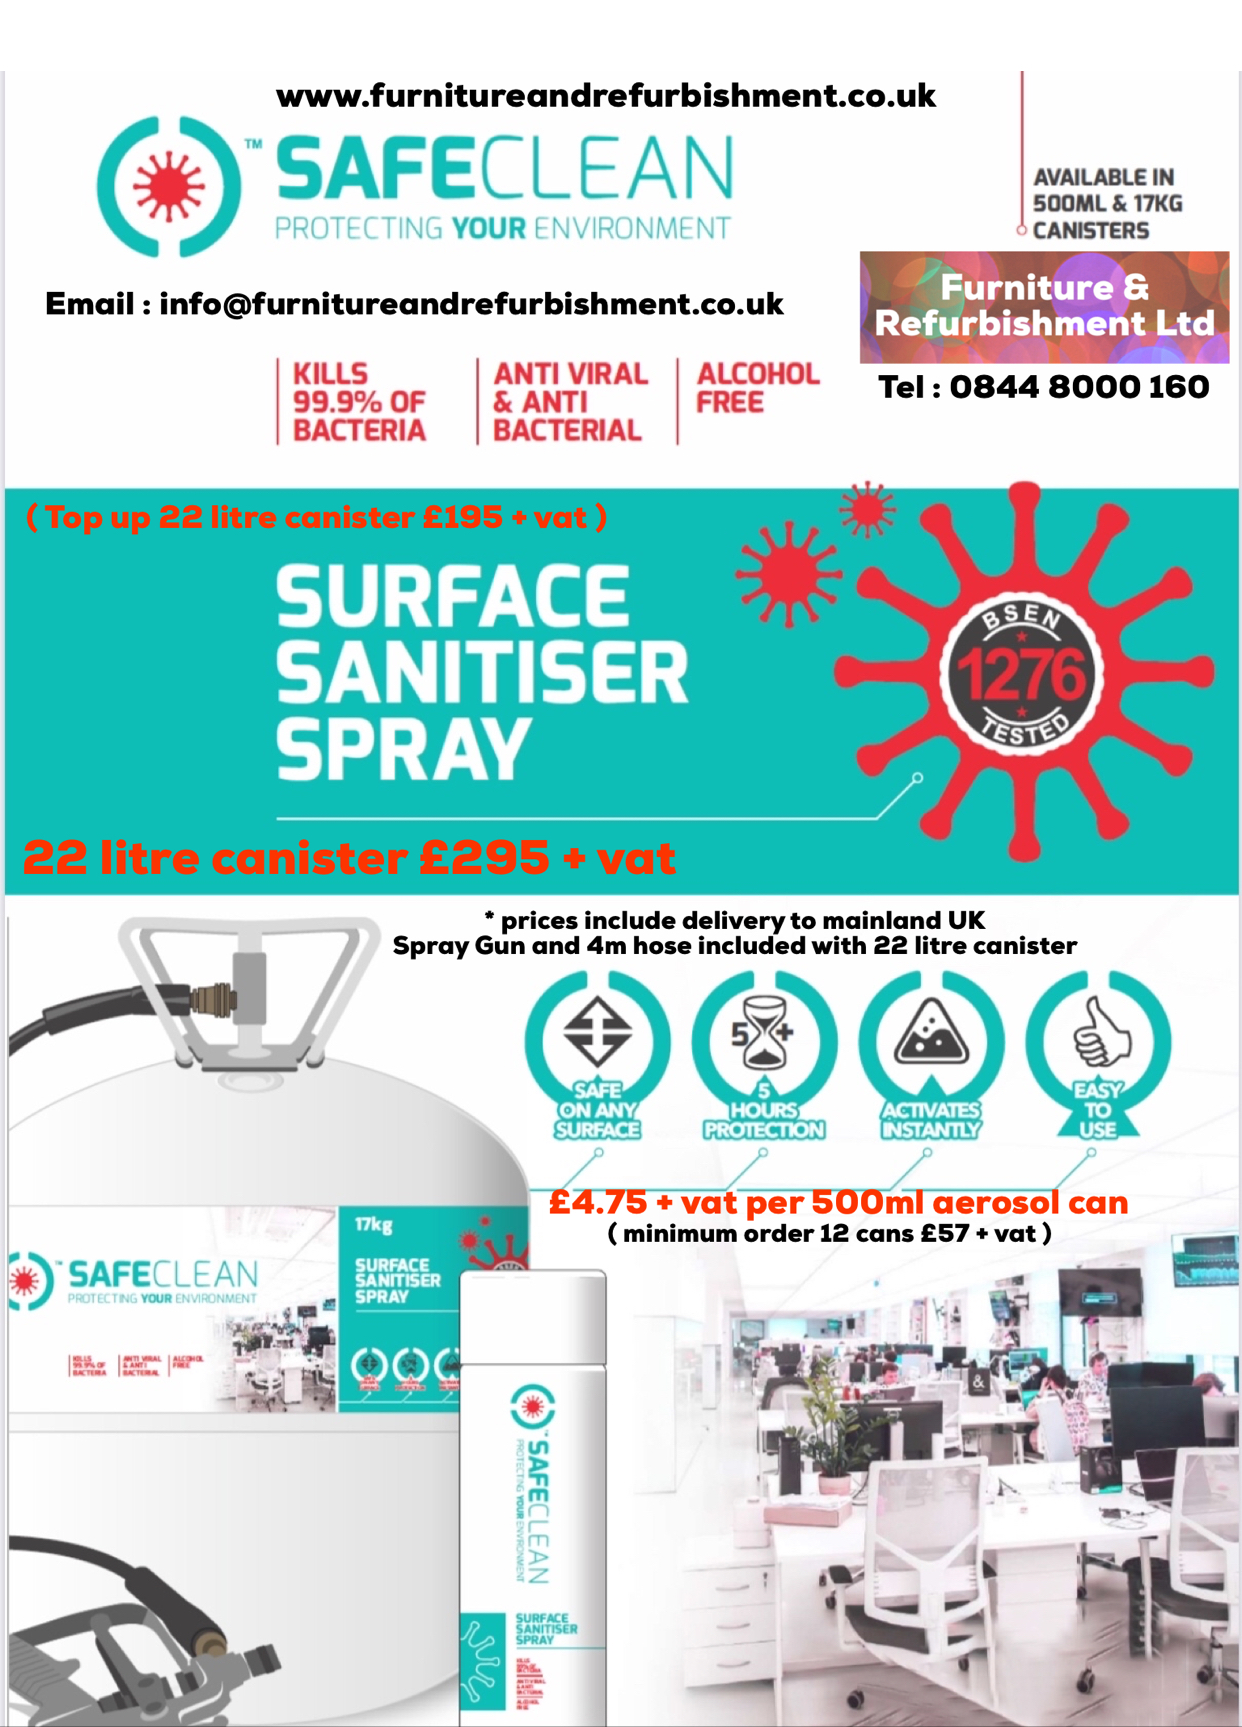 Anti Viral / Bacterial Surface Sanitiser Canister 22 litres complete with spray gun and 4 metre hose , safe to use on any surface 